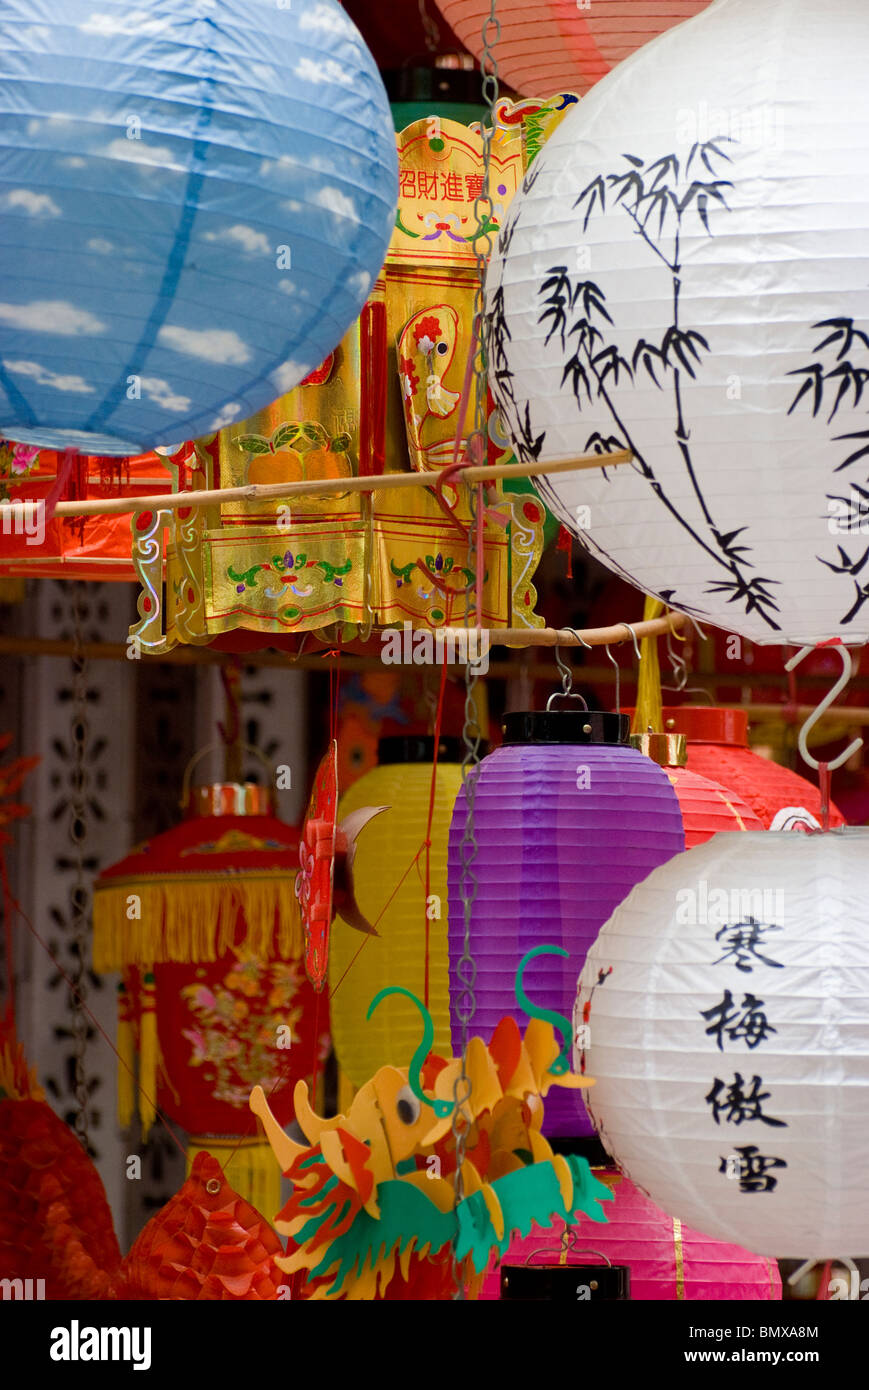 On the day before Chinese New Year in Hong Kong, China, the markets in the central district display Chinese lanterns for sale. Stock Photo